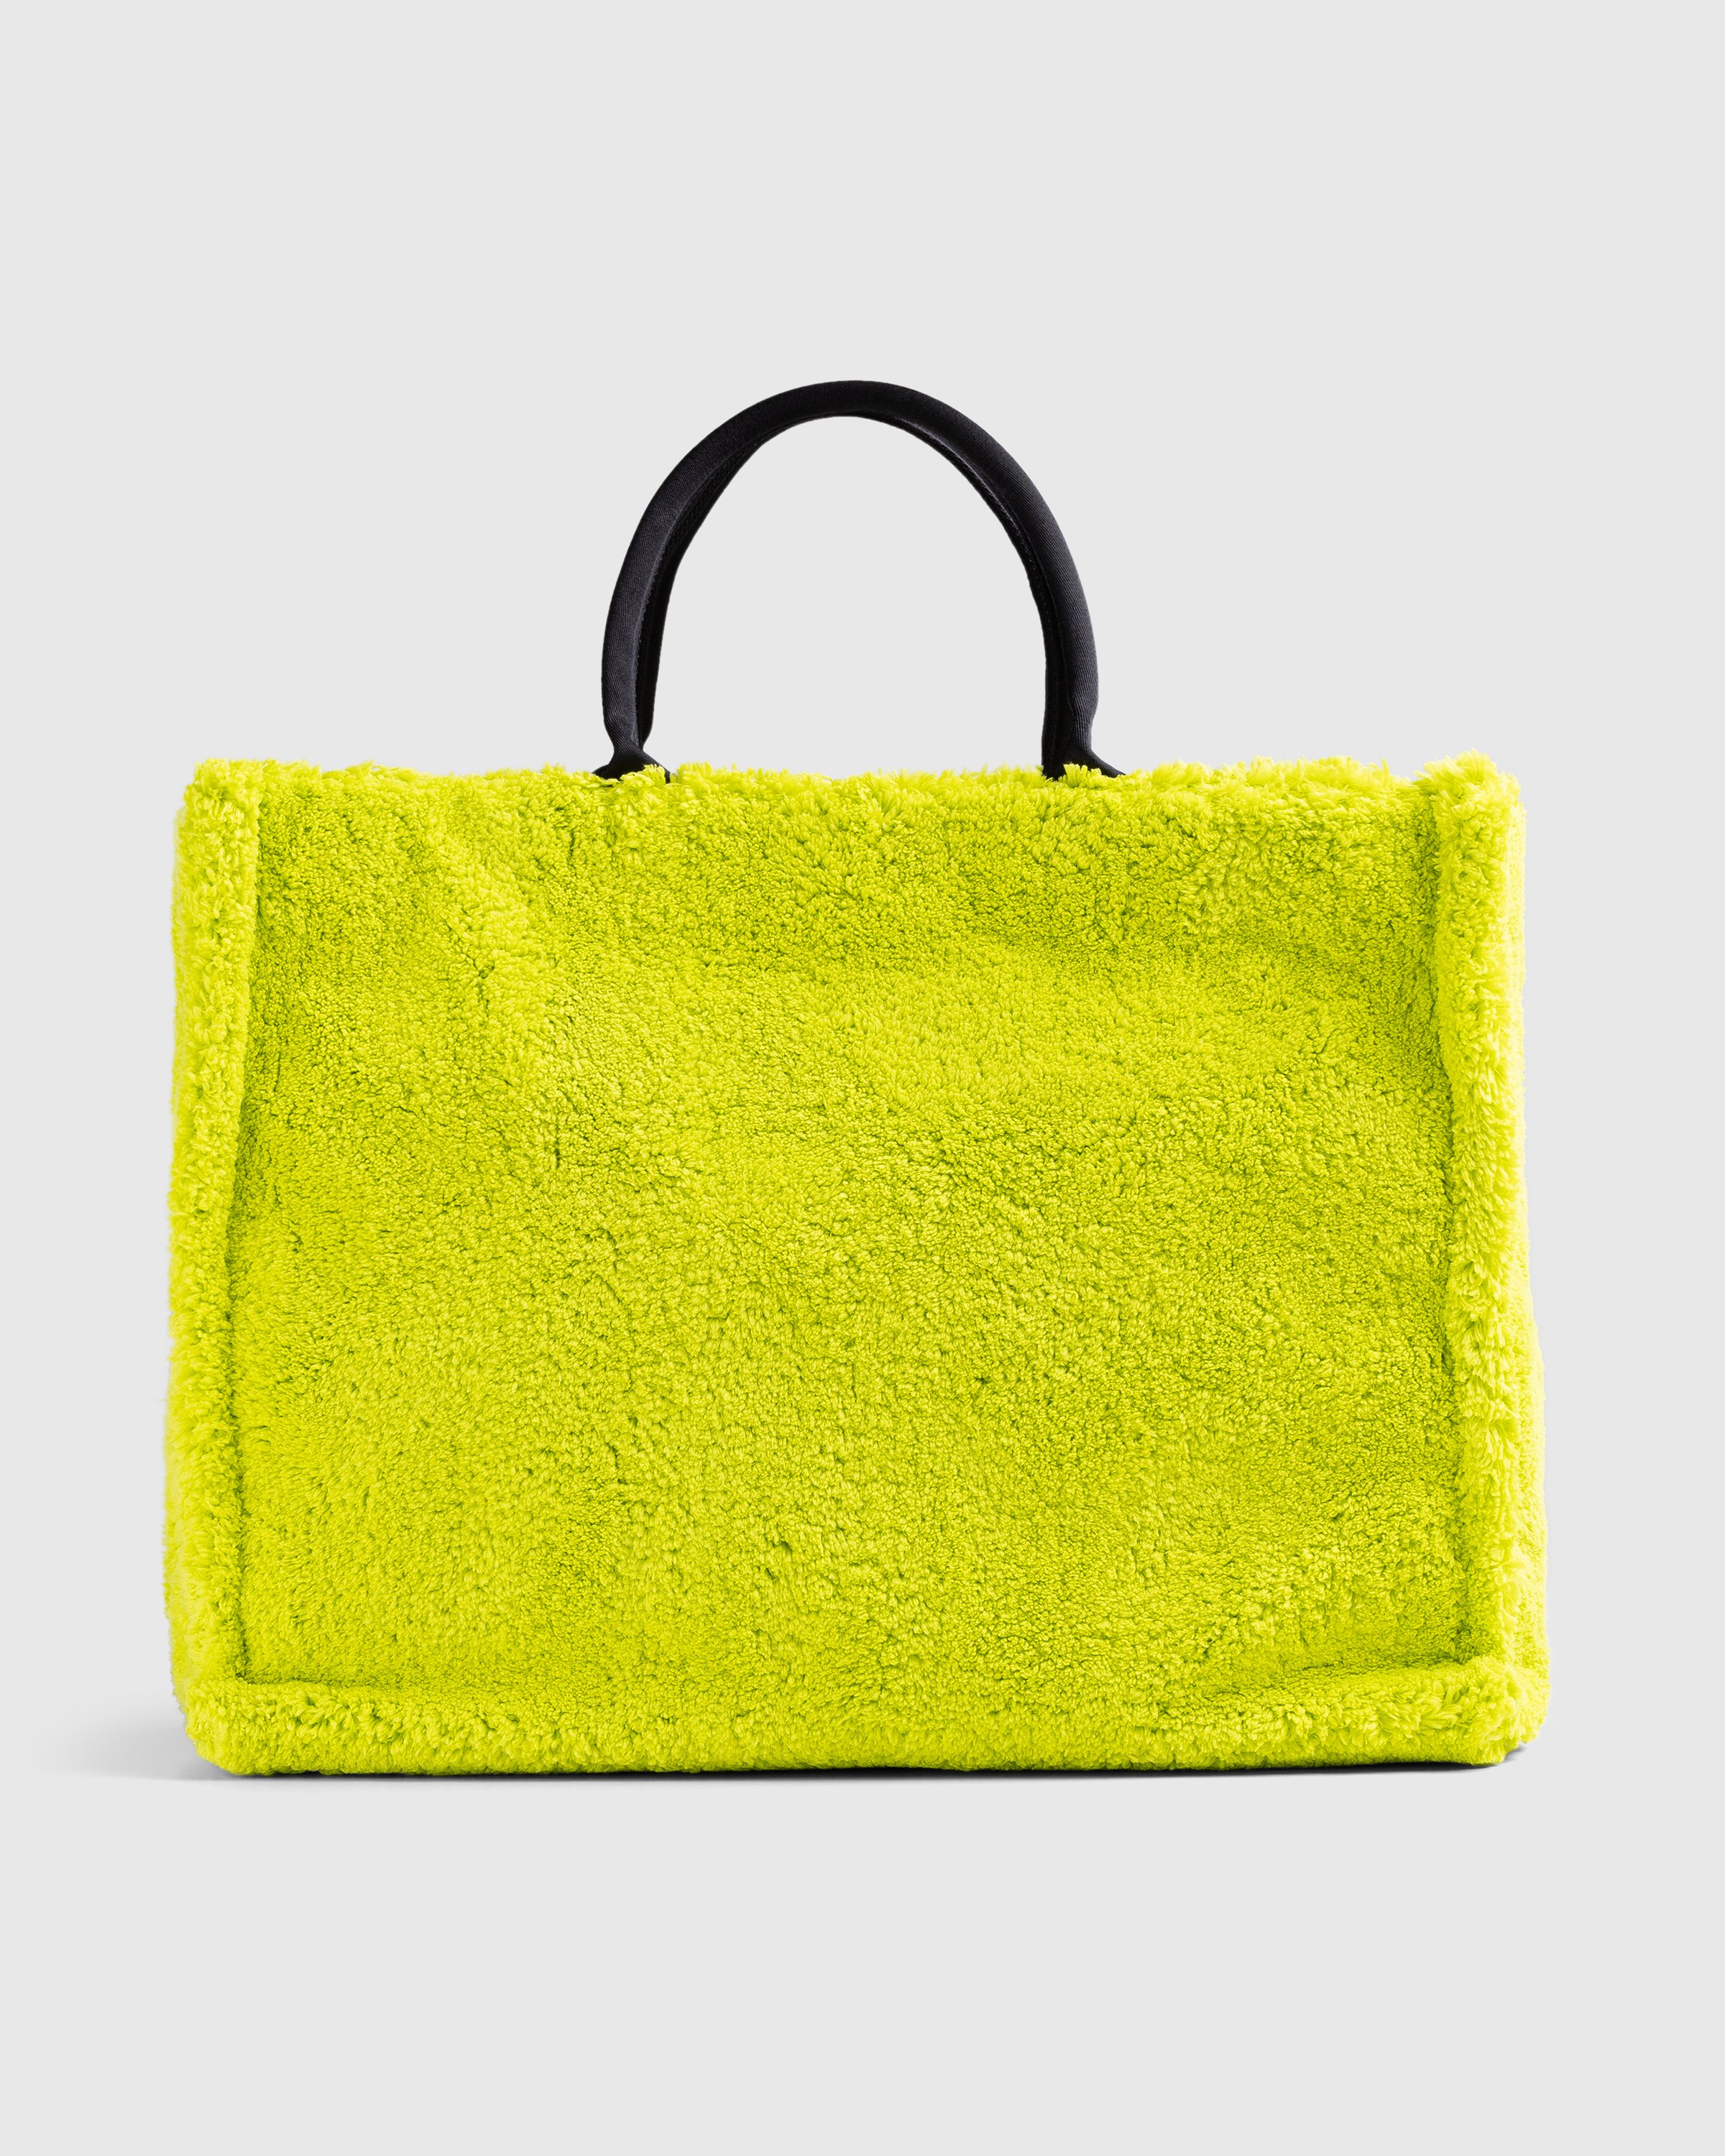 Marni - Terry Cloth Tote Bag Light Lime - Accessories - Green - Image 2